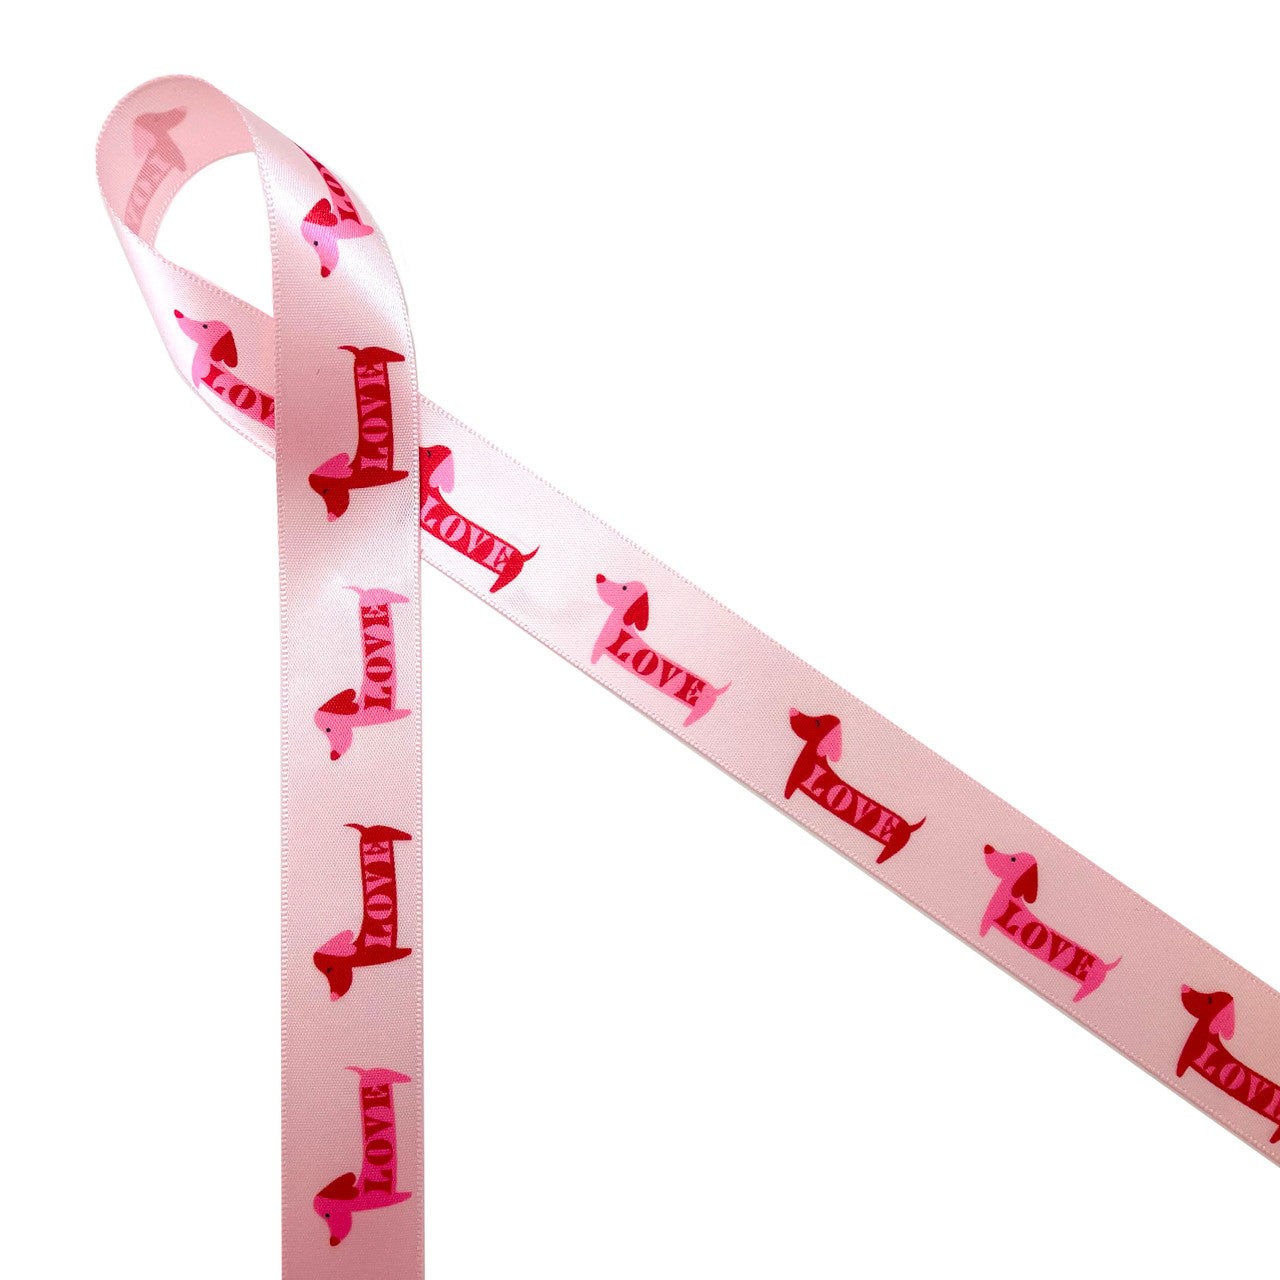 Puppy love ribbon with dachshund wiener dogs in pink and red printed on 7/8" light pink single face satin ribbon is an adorable ribbon for Valentine's Day. This sweet ribbon is perfect for gift wrap, gift baskets, pet gifts, Valentine favors, party decor, candy shops and  chocolatiers. This is also a sweet ribbon for pet loss and remembrance. All our ribbon is designed and printed in the USA